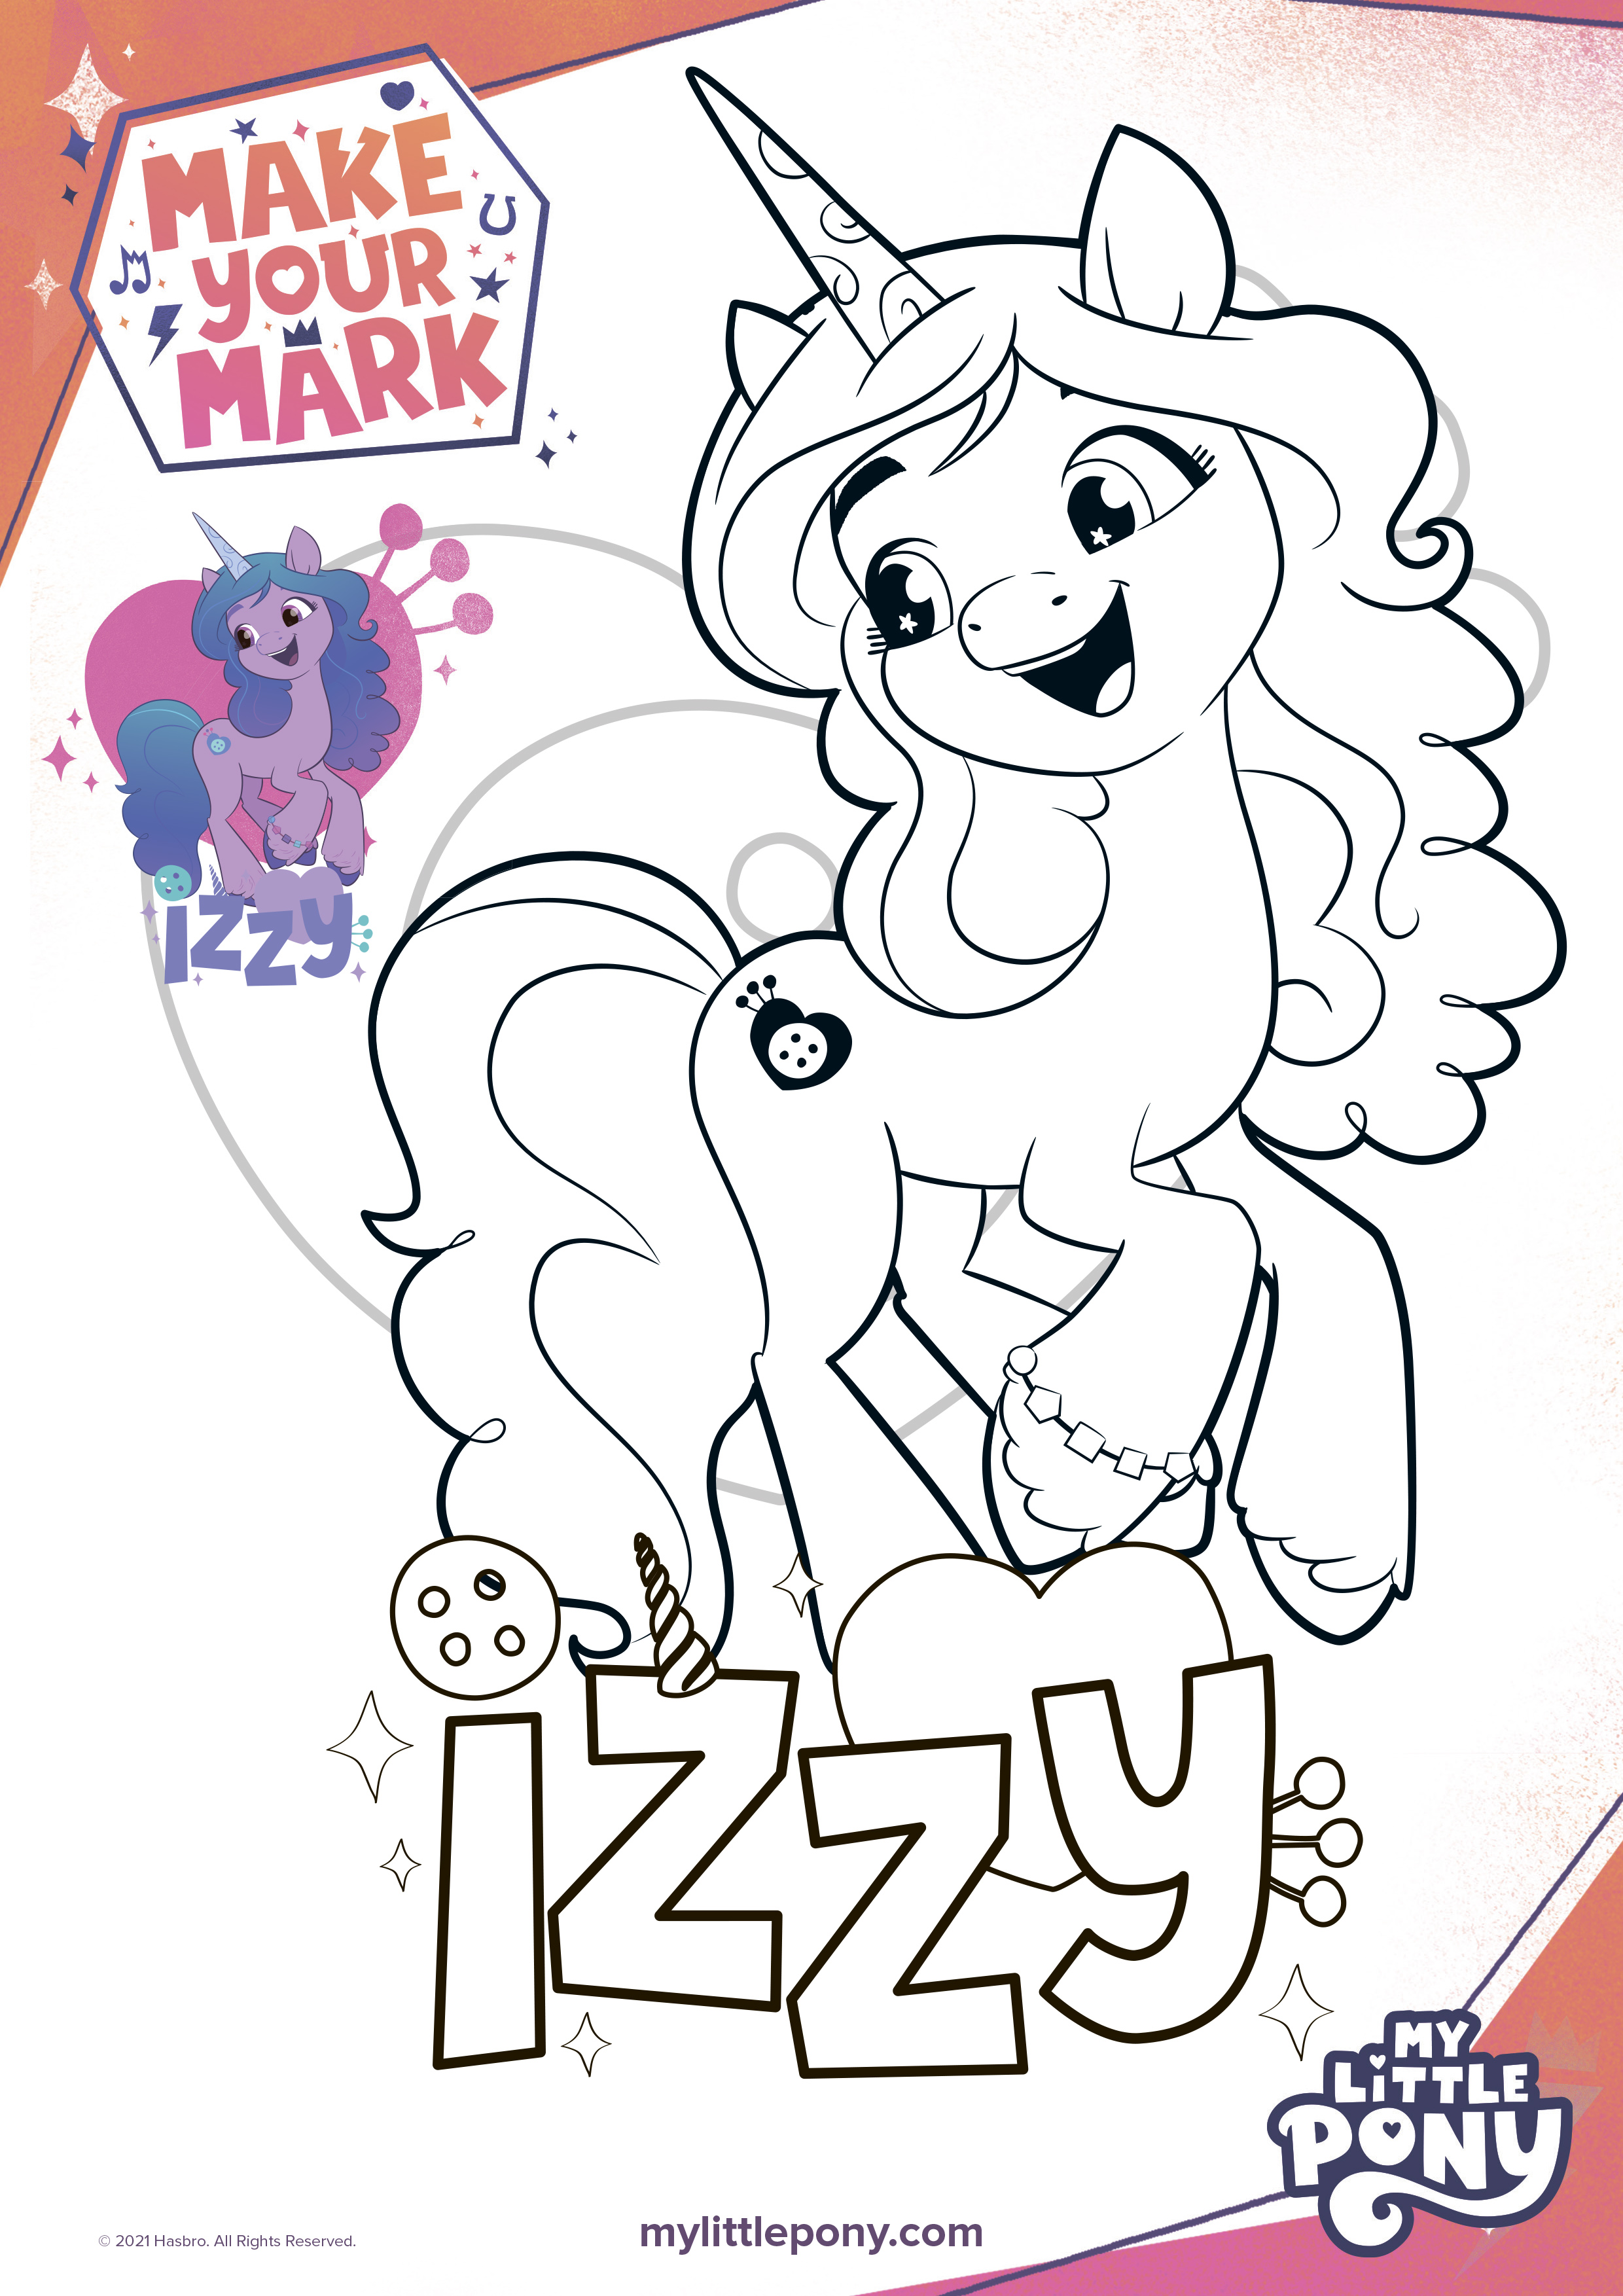 My Little Pony coloring page with logo, It's just an exampl…